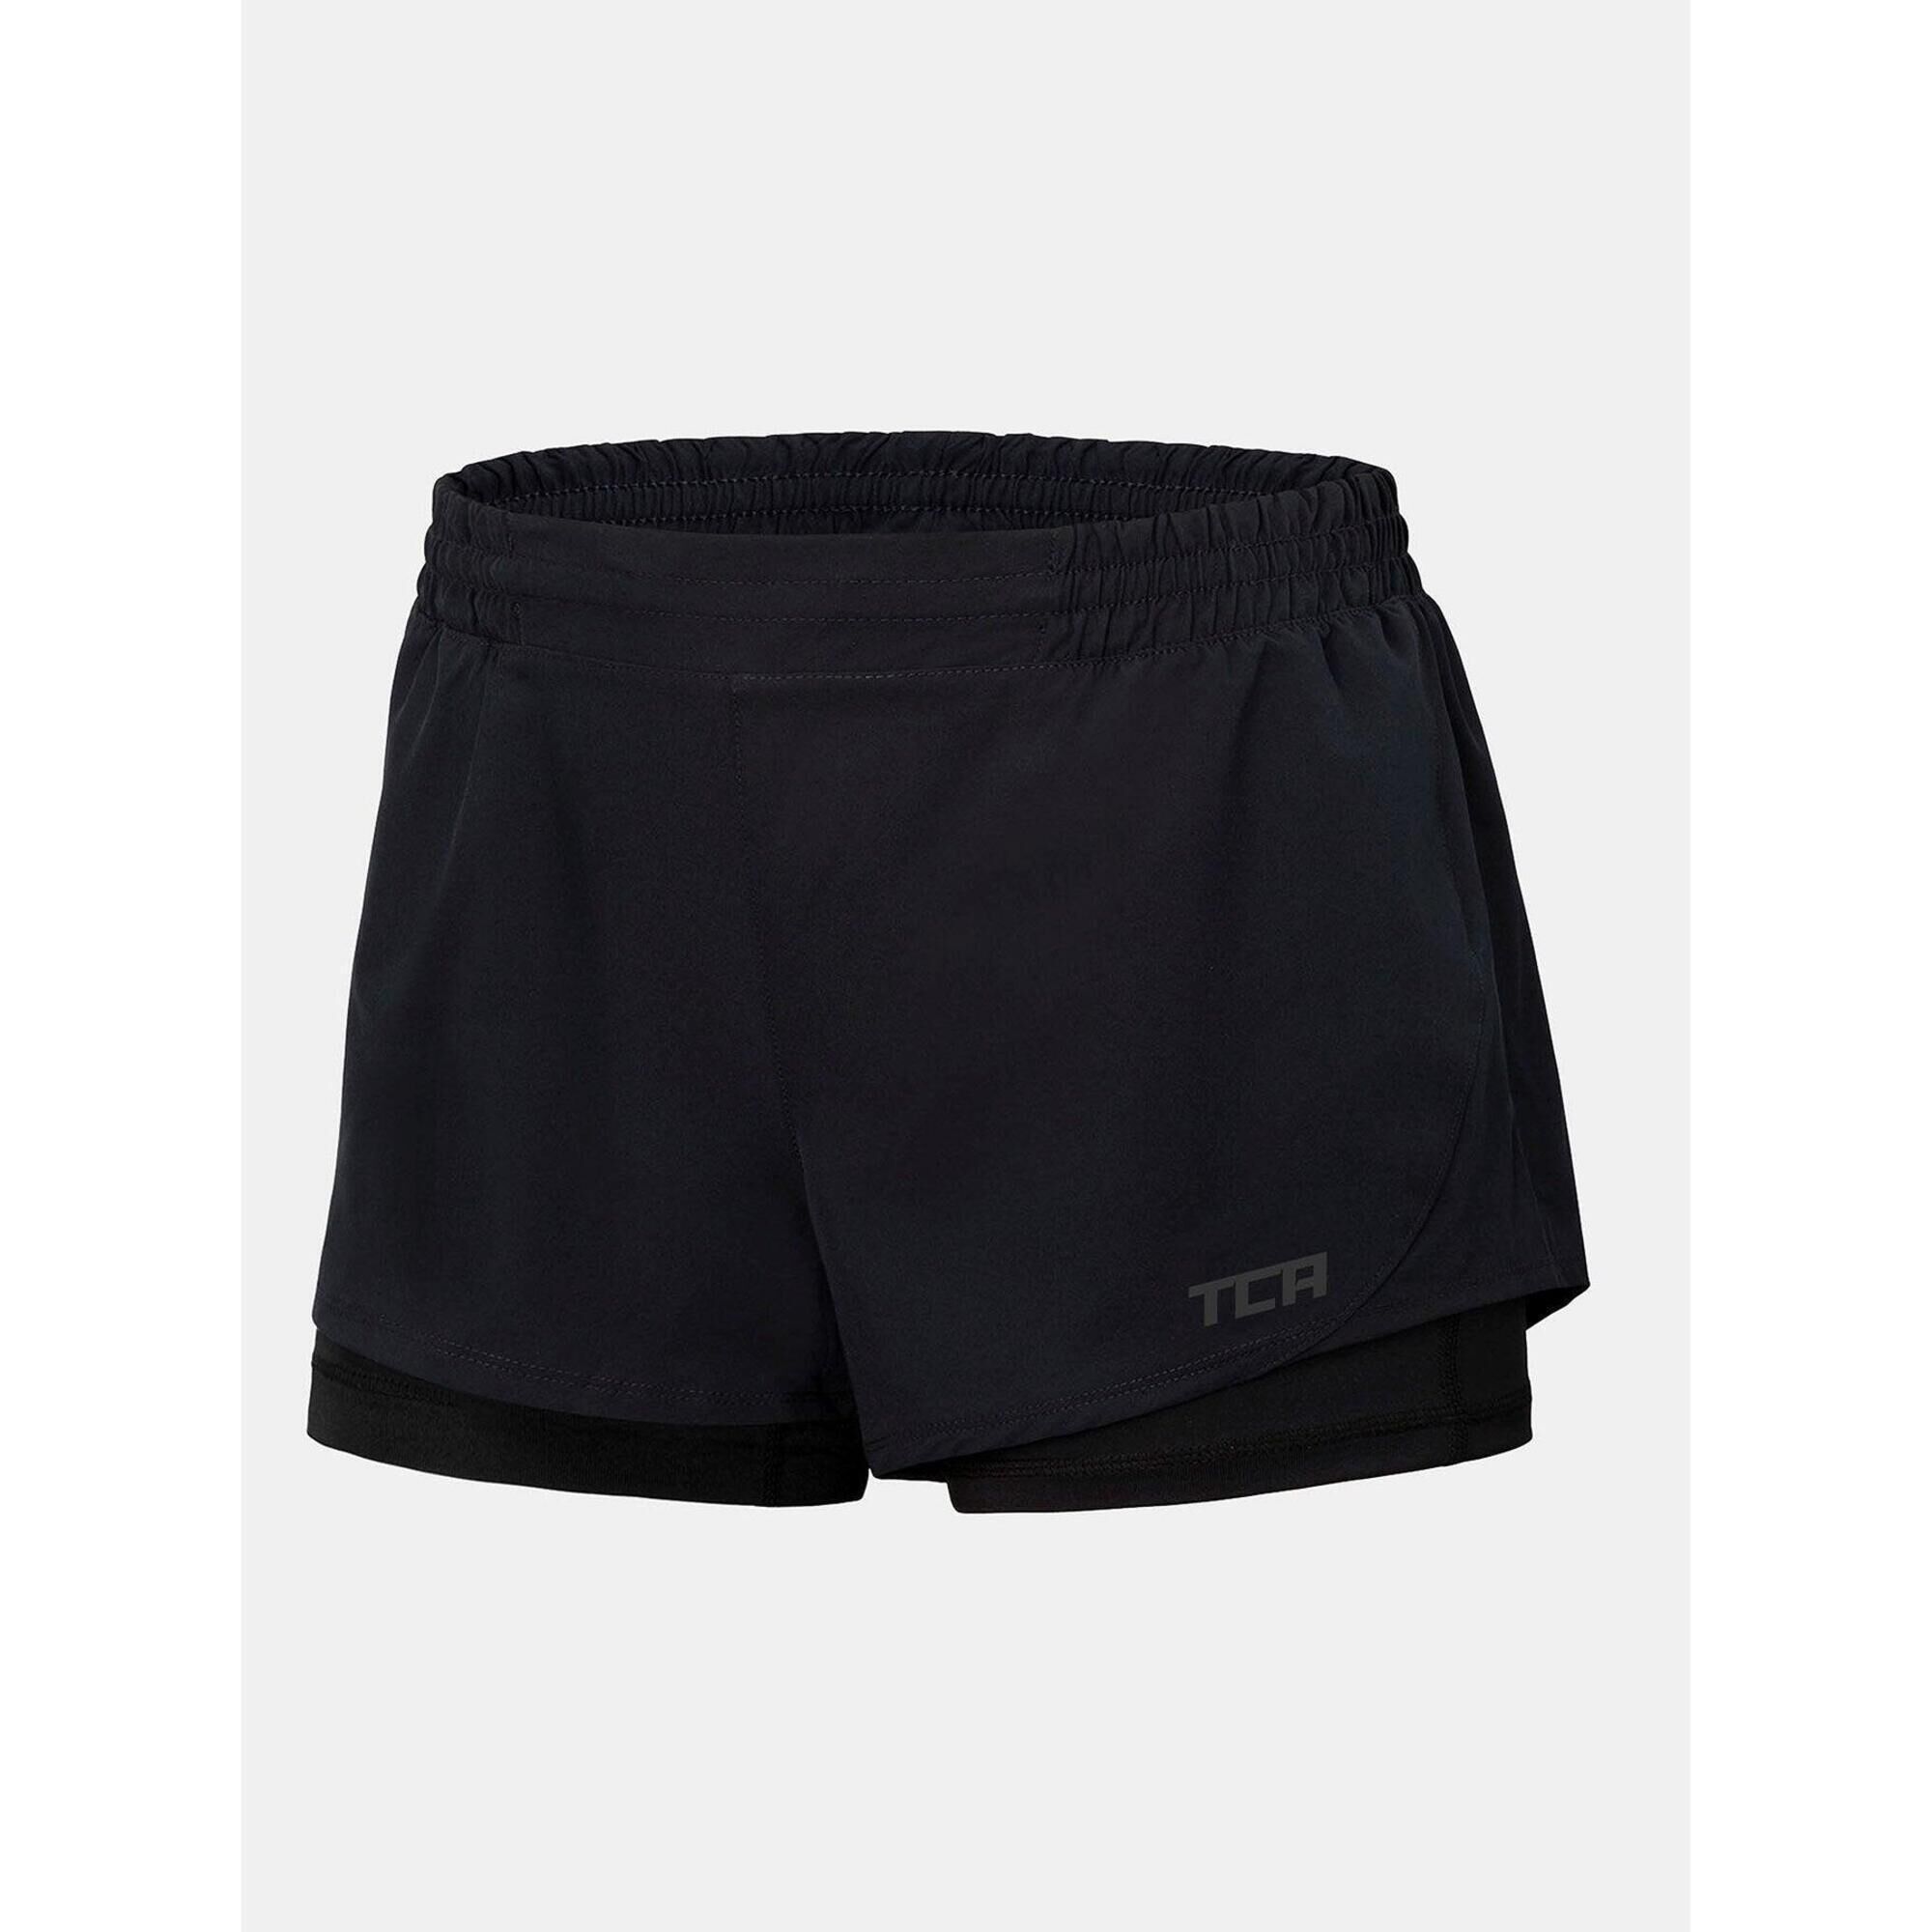 TCA Women’s Perform 2-in-1 Shorts with Zip Pocket - Anthracite